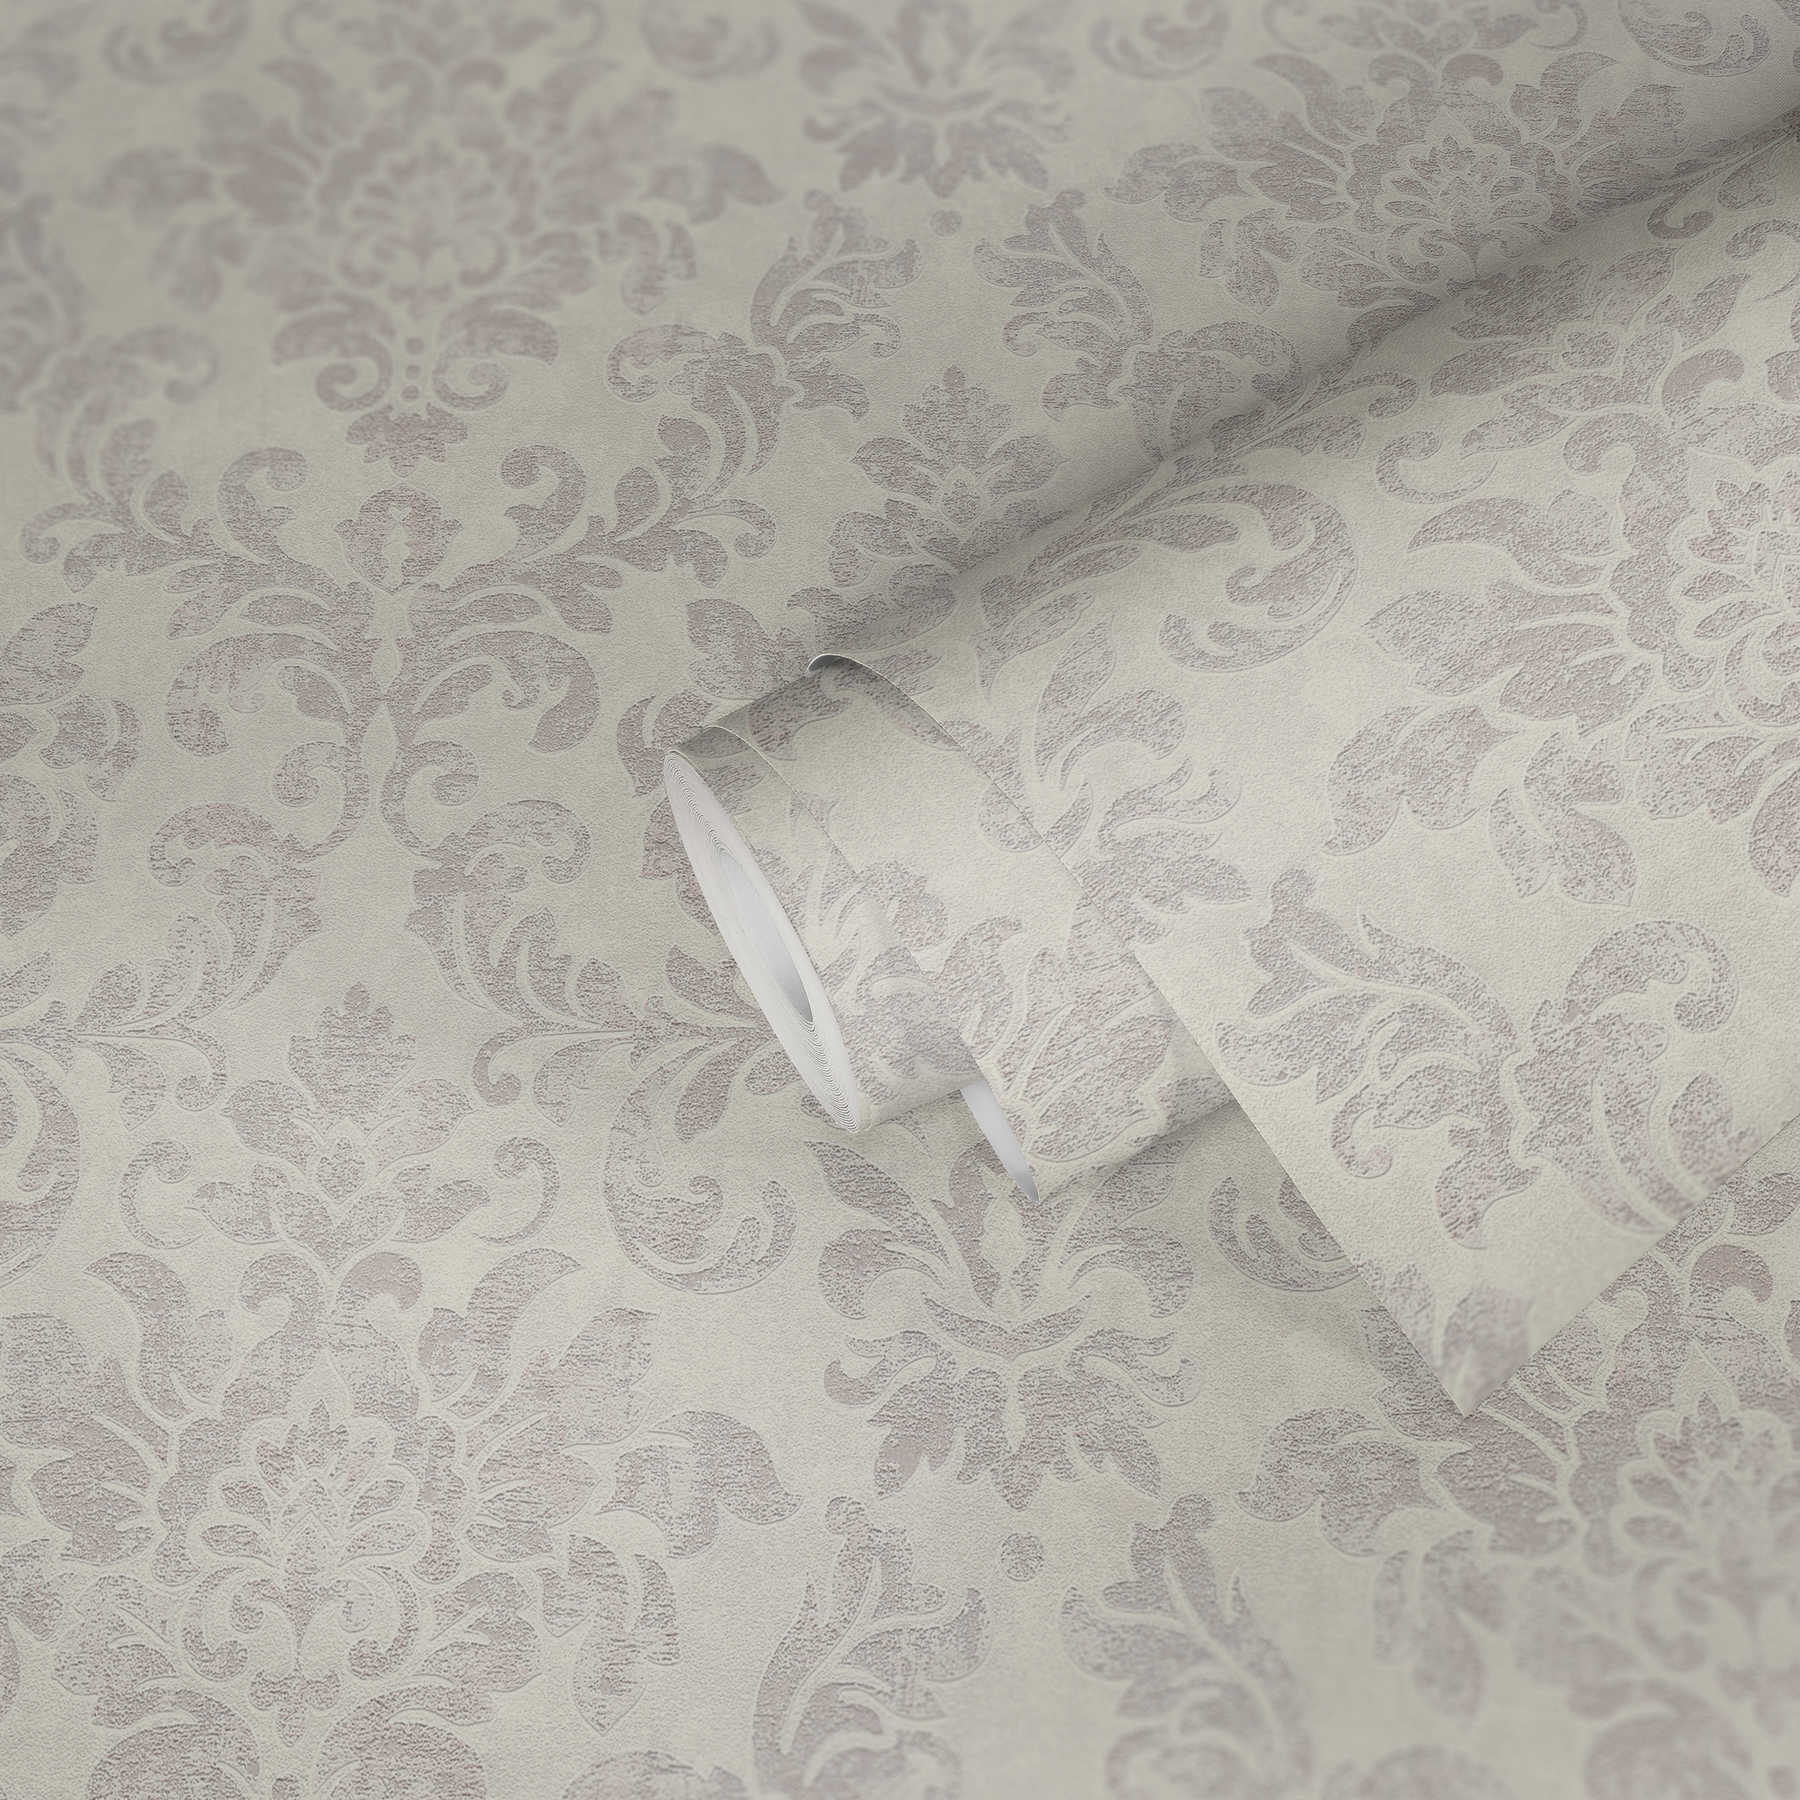             Baroque wallpaper ornaments in used look - white, grey, pink
        